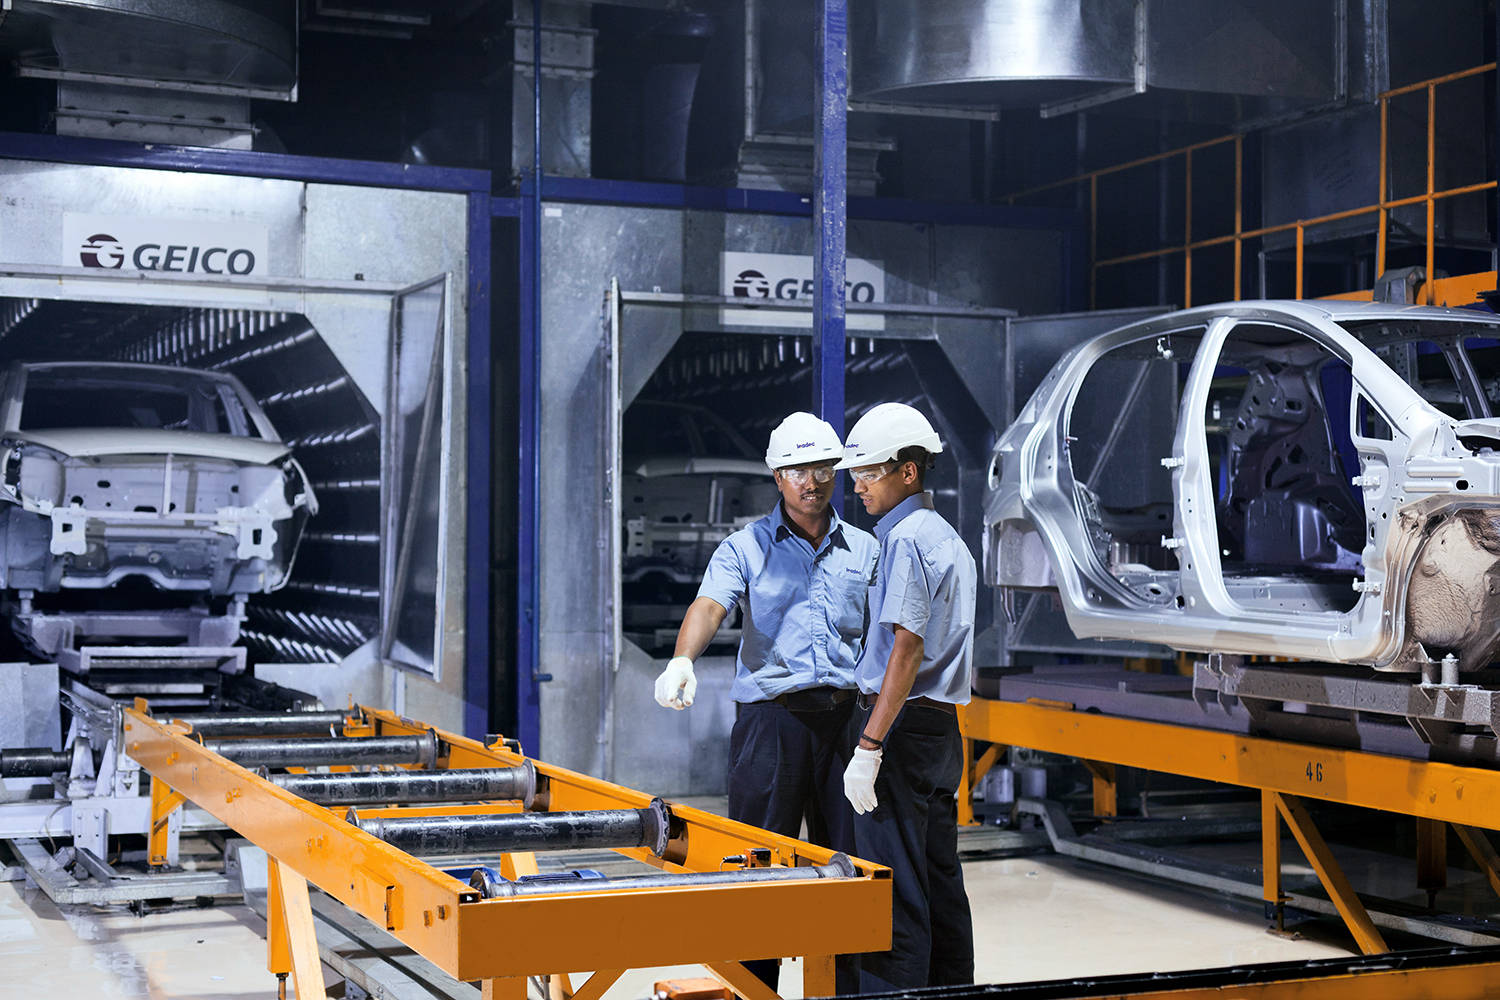 Two Leadec employees at a conveyor belt in an automotive factory.